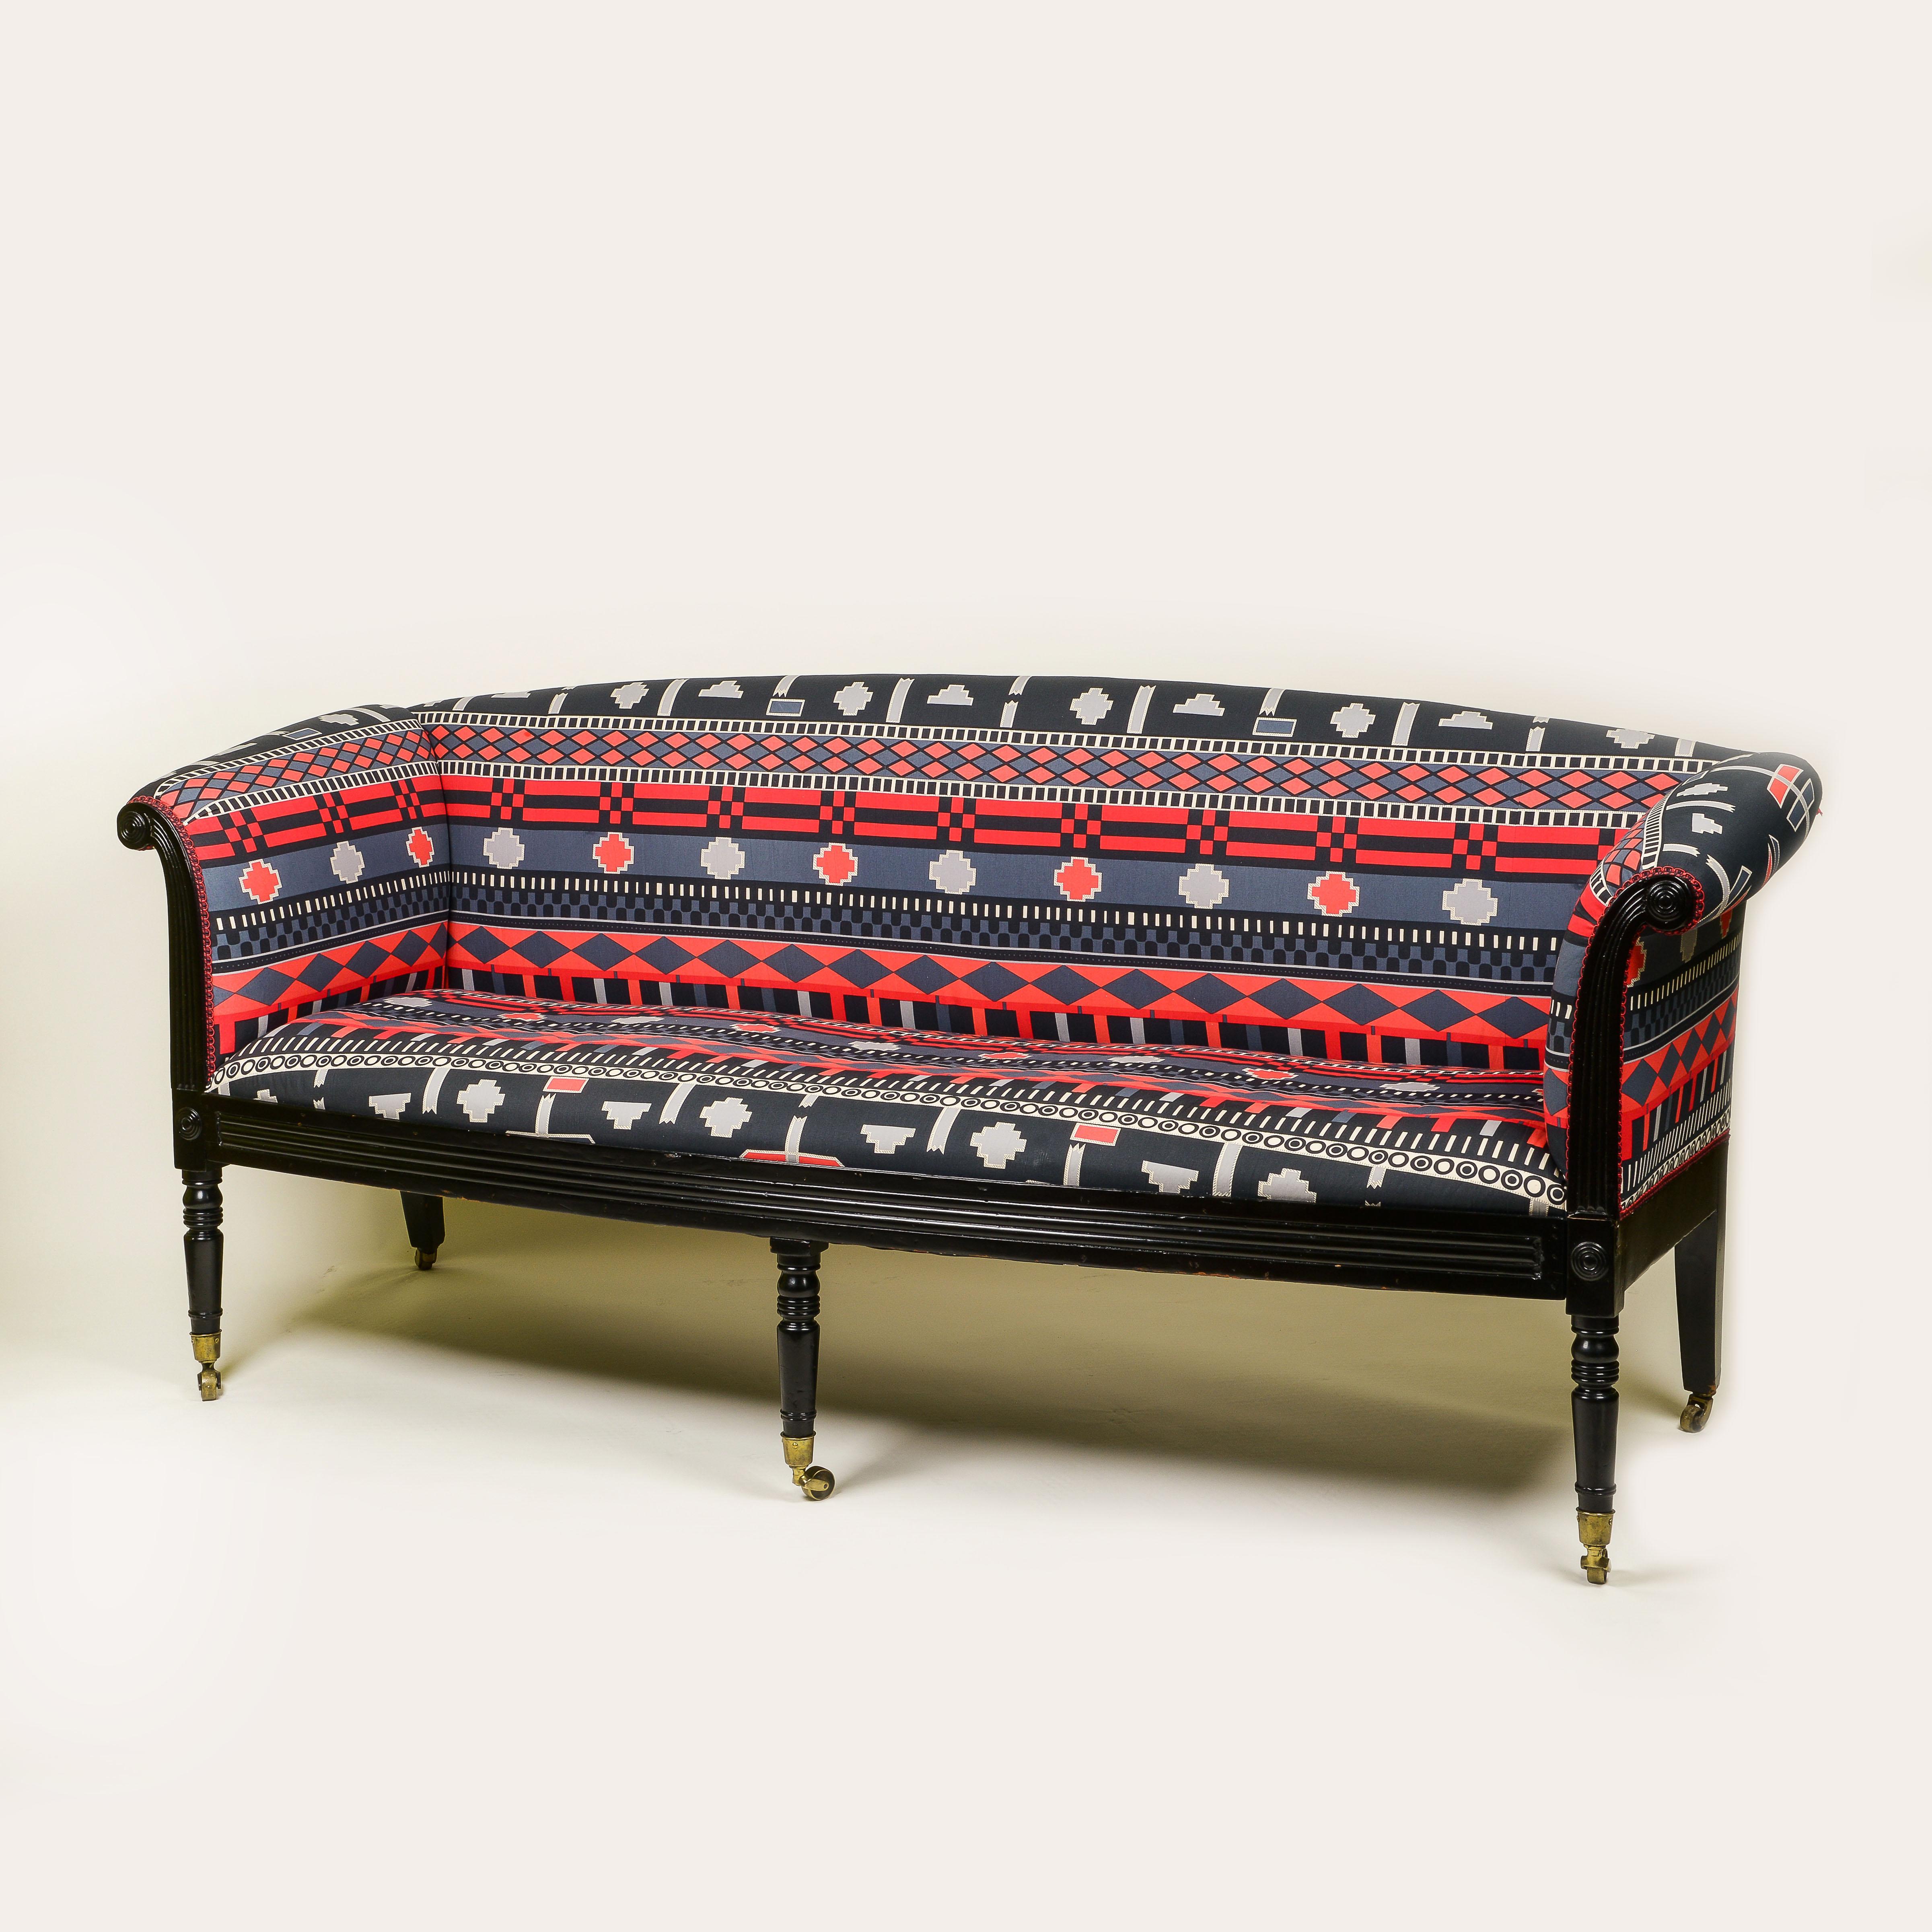 A reupholstered Regency style settee in a vintage YSL fabric.